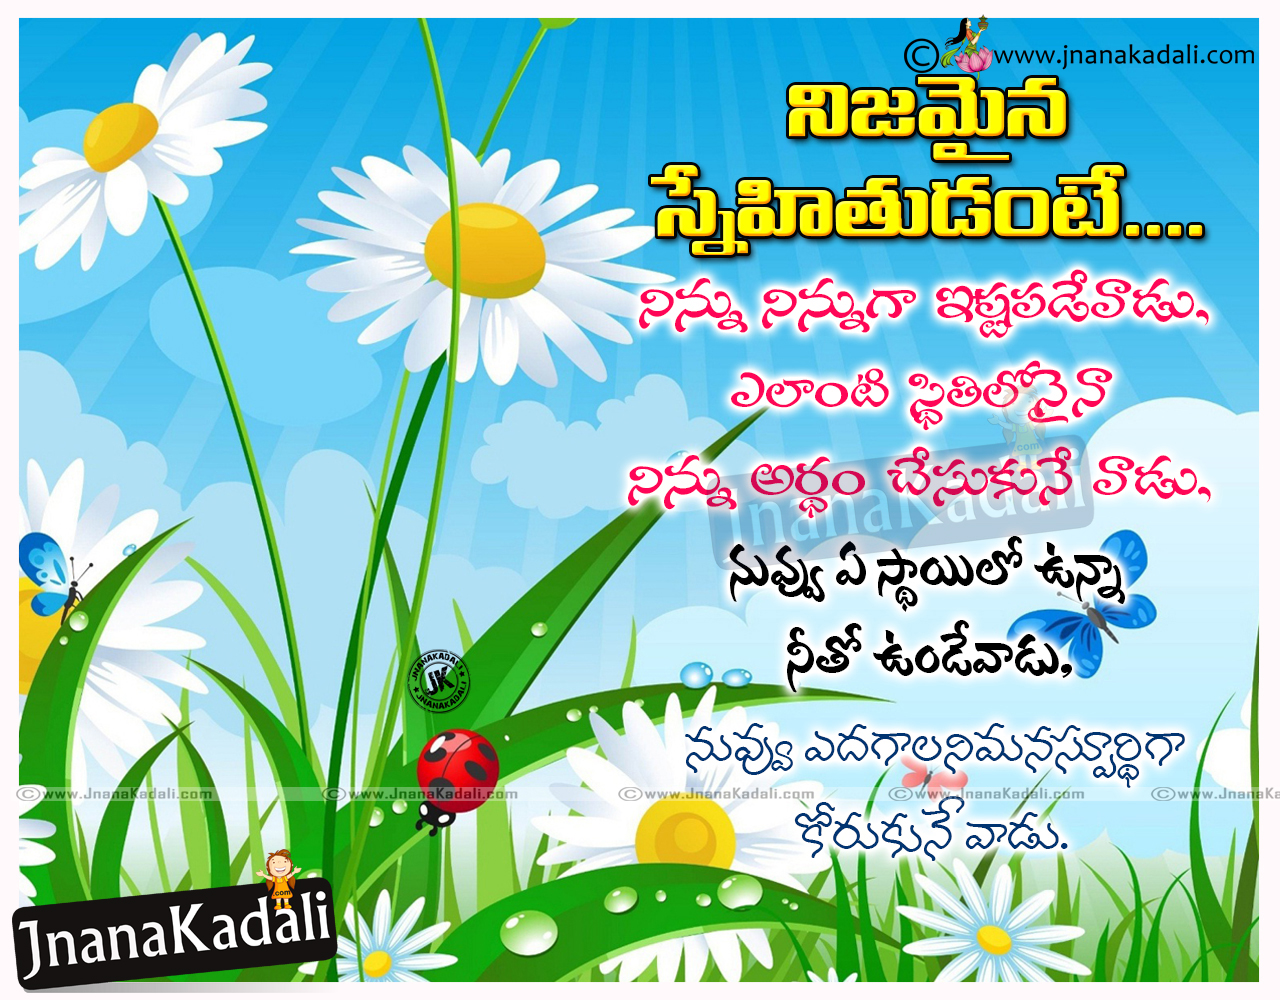 Telugu Friendship Day Greetings Quotations messages with ...